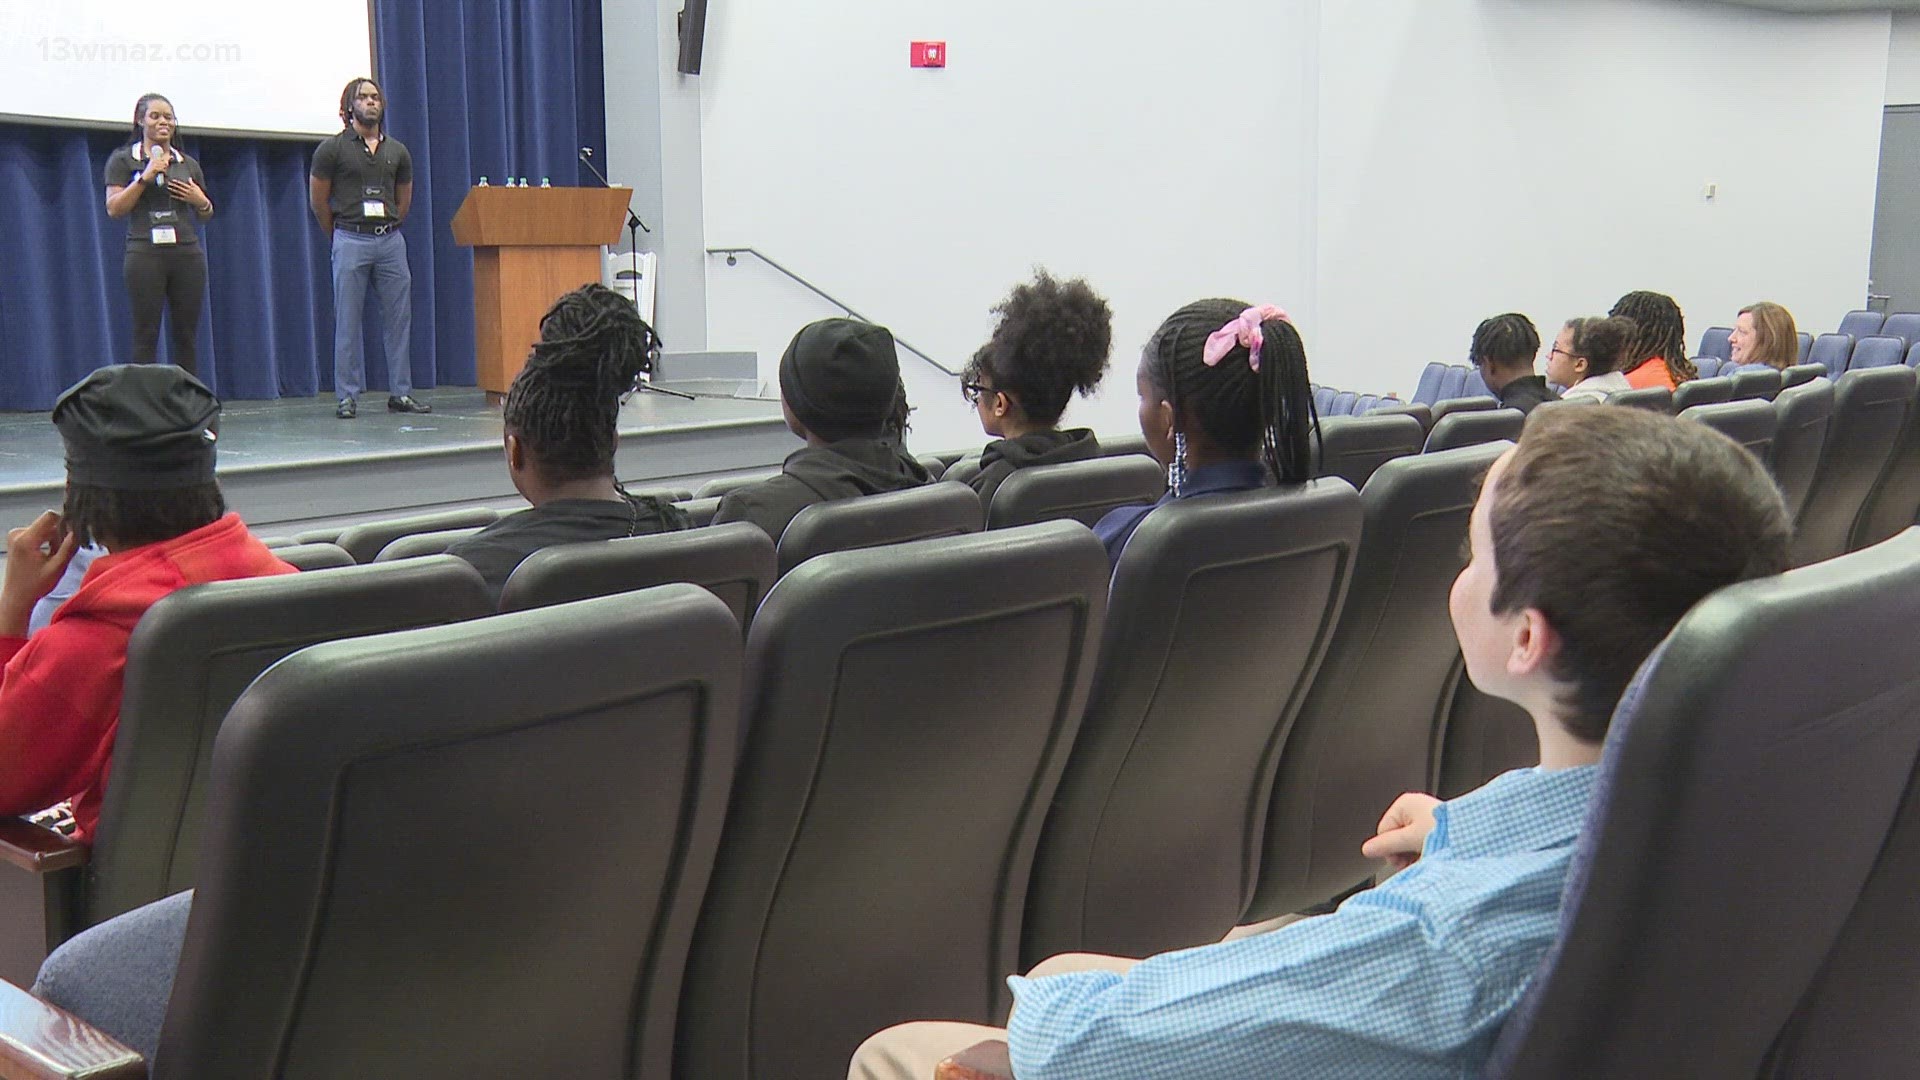 The program aims to educate high school students about local government and community issues.